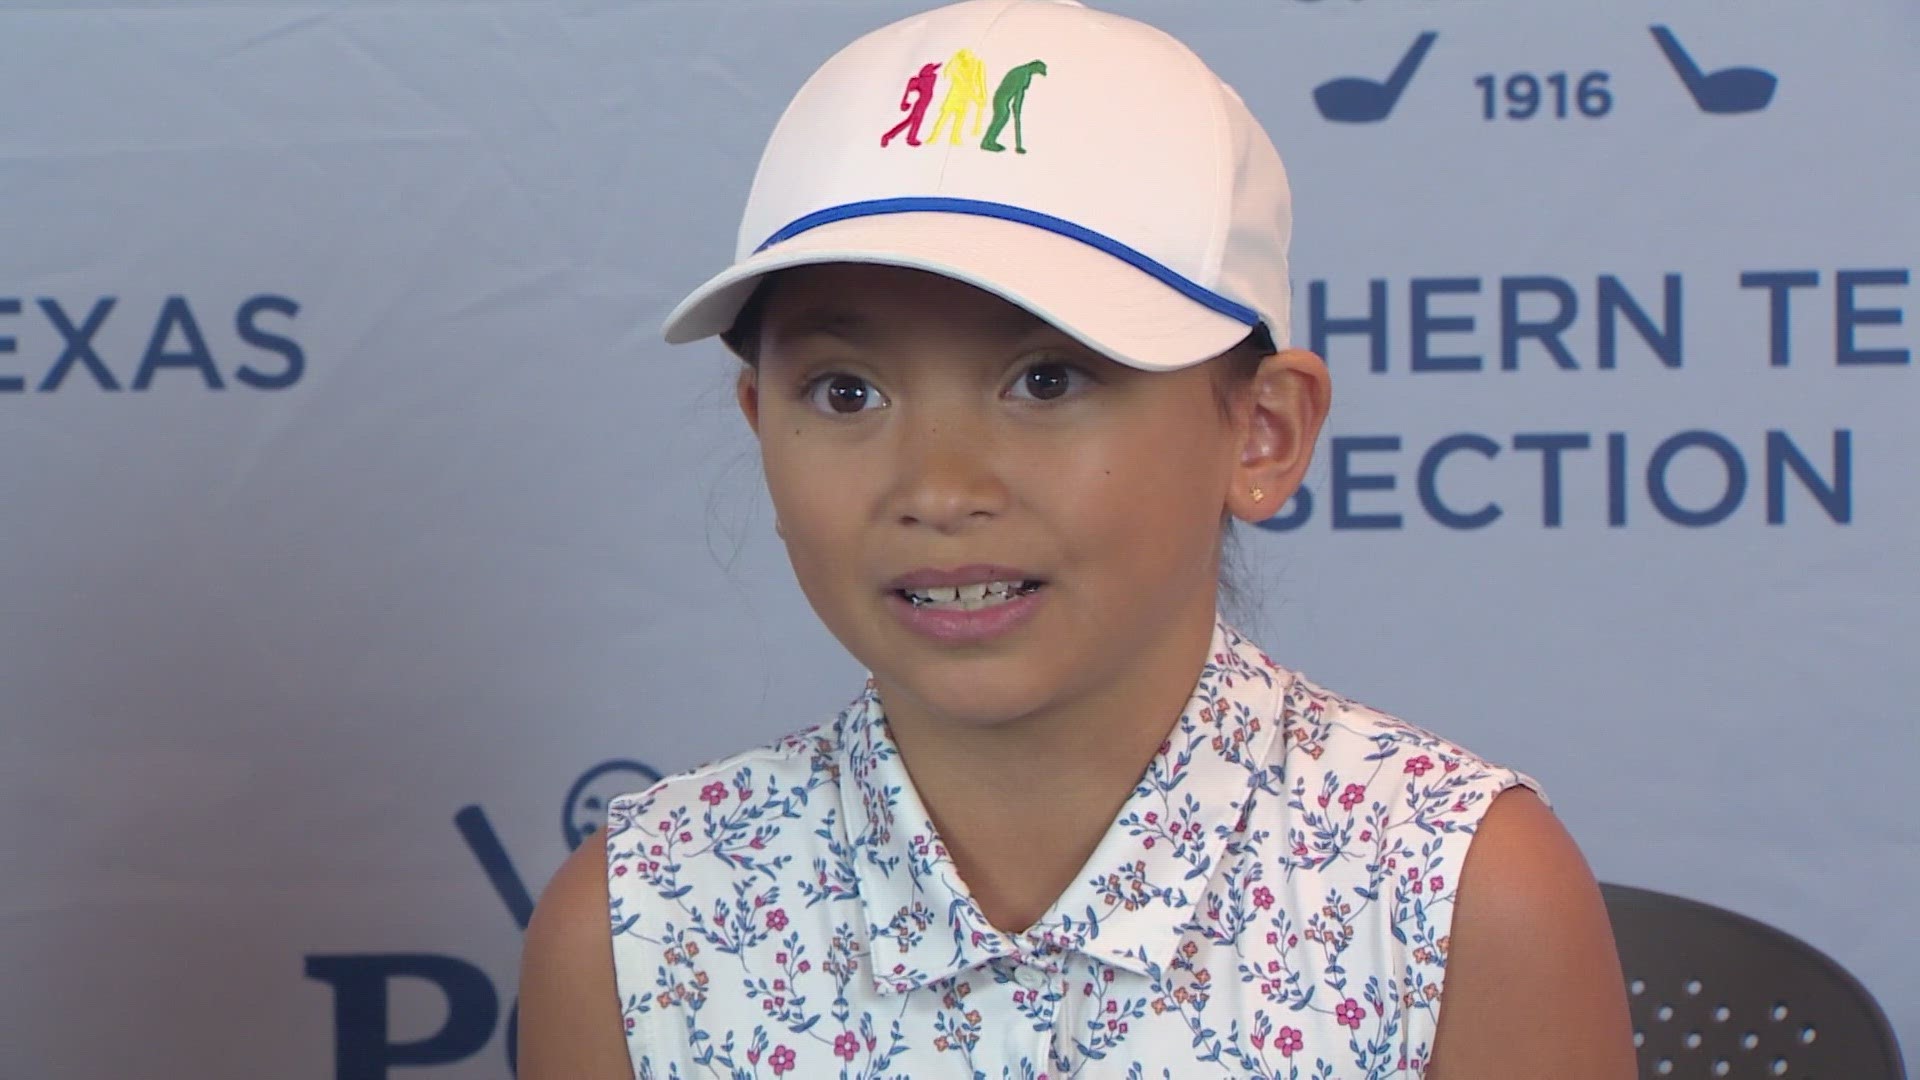 The three girls will compete at Augusta National in the finals. And they're planning to win!